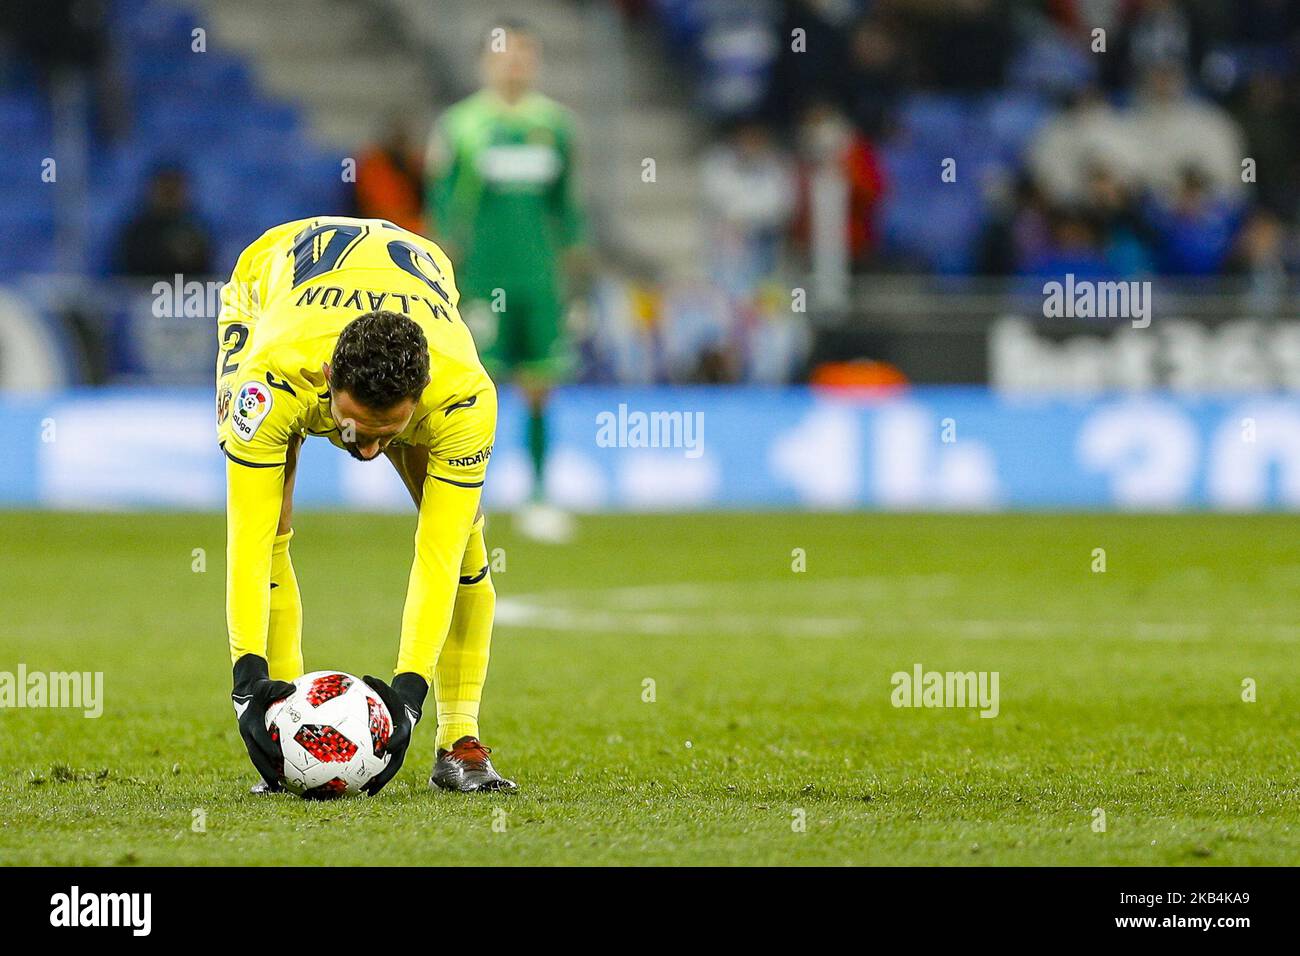 Miguel Layun (24) of Villarreal CF during the match RCD Espanyol v Villarreal CF, for the round of 16 of the Copa del Rey played at Camp Nou on January 17, 2019 in Barcelona, Spain. (Photo by Mikel Trigueros/Urbanandsport/NurPhoto) Stock Photo